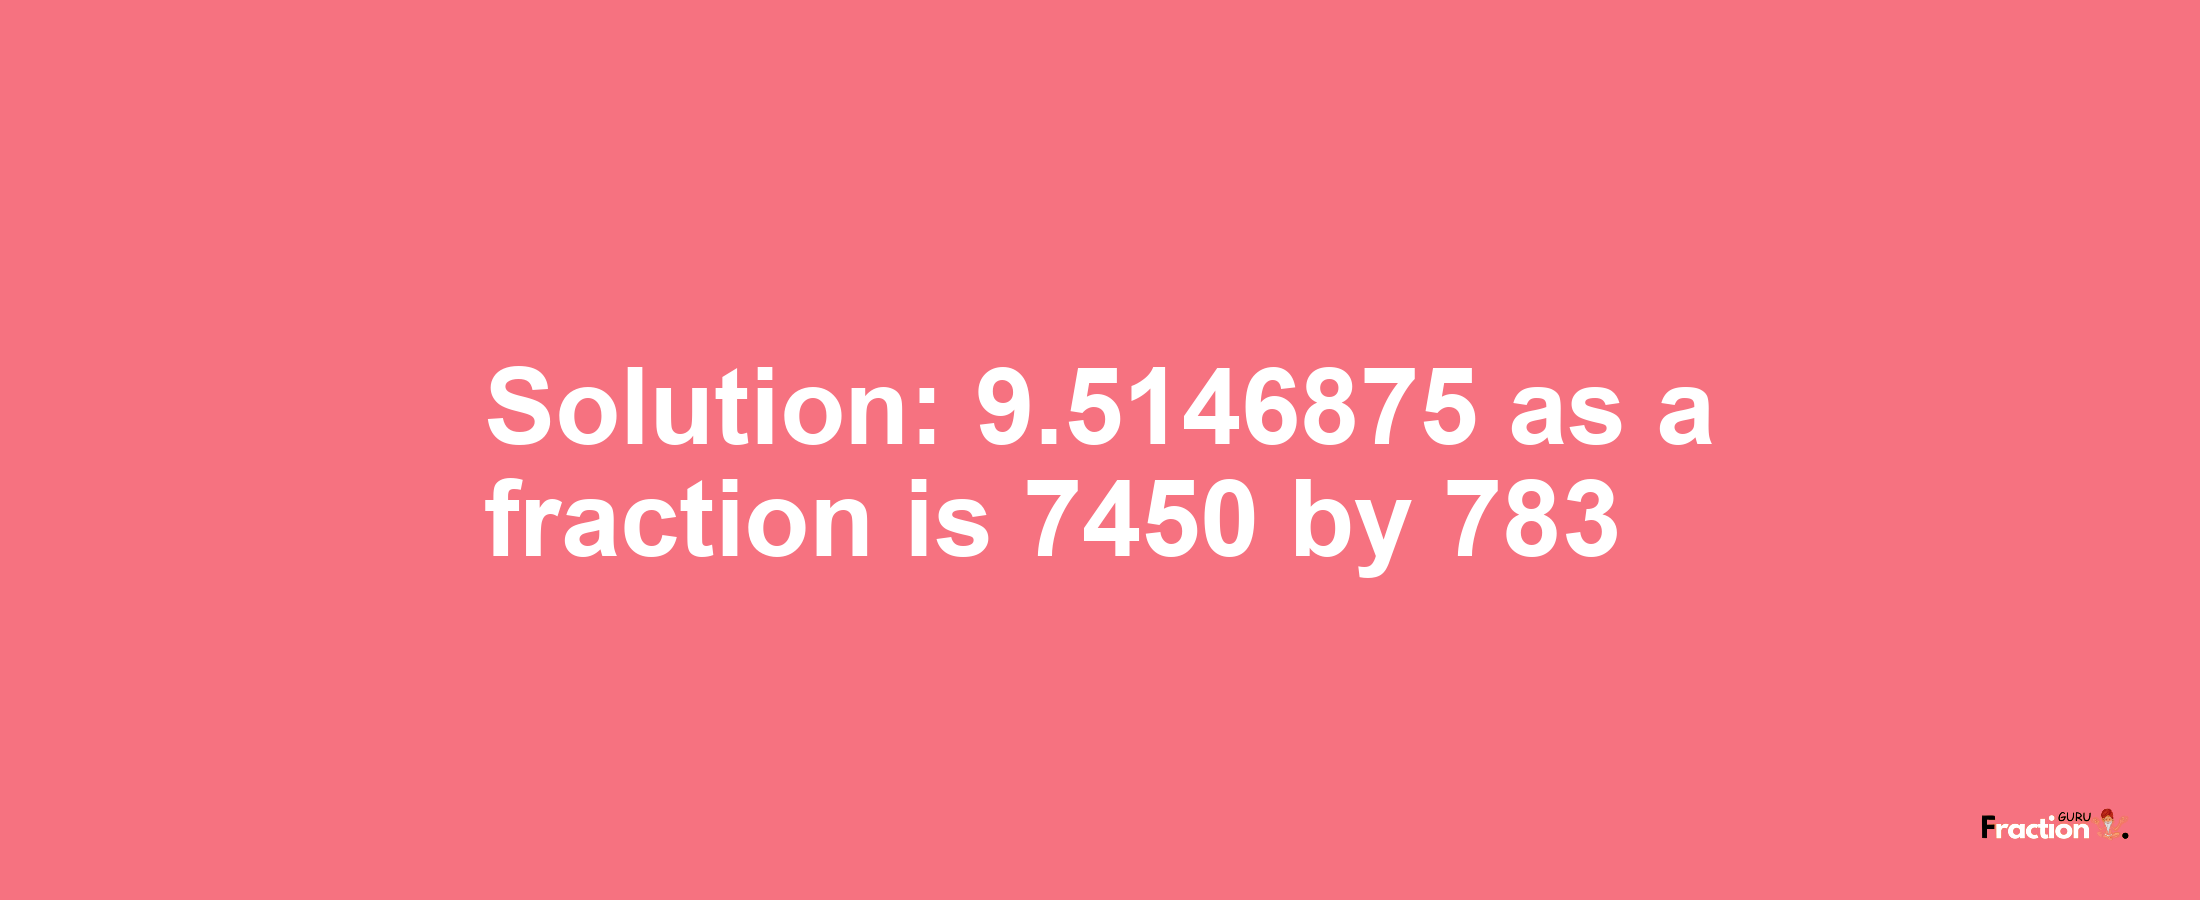 Solution:9.5146875 as a fraction is 7450/783